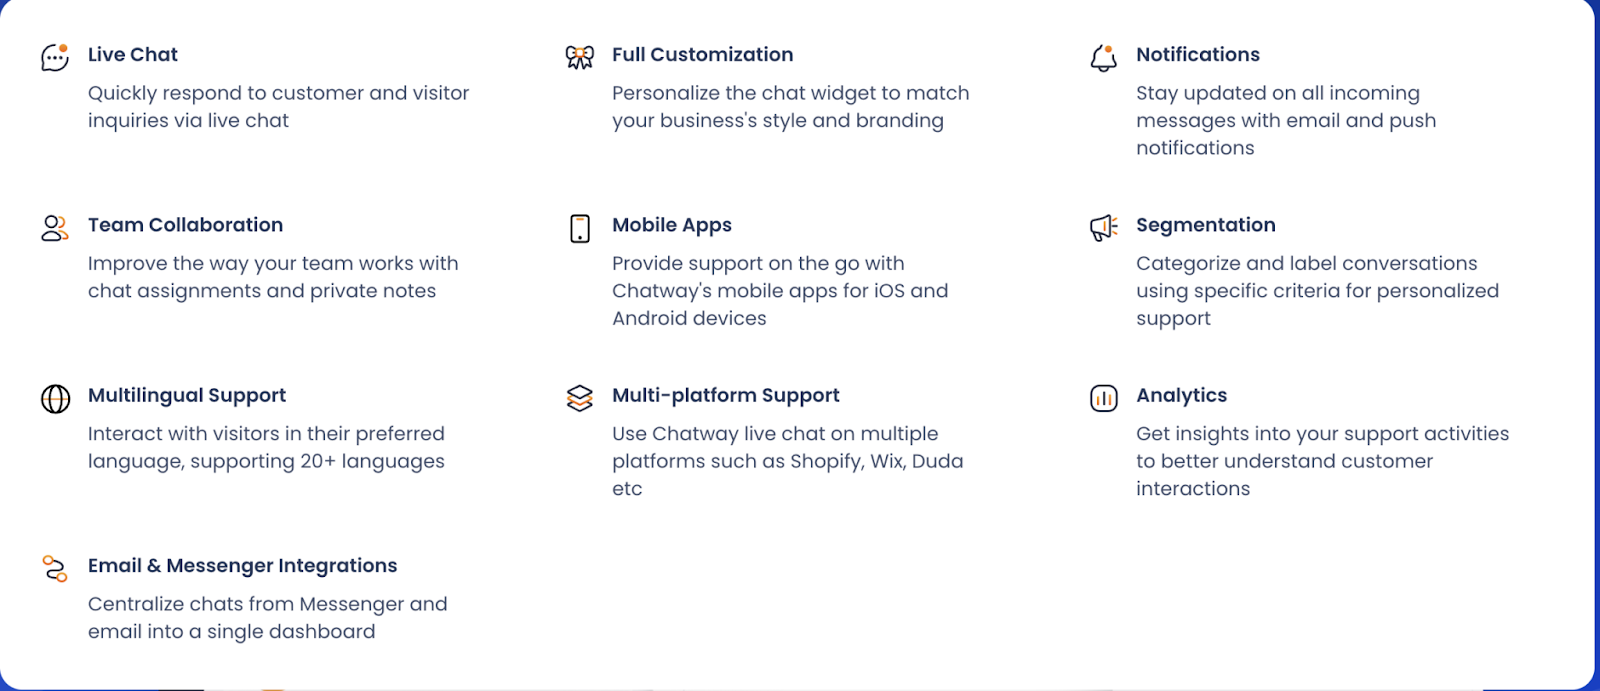 Chatway live chat features